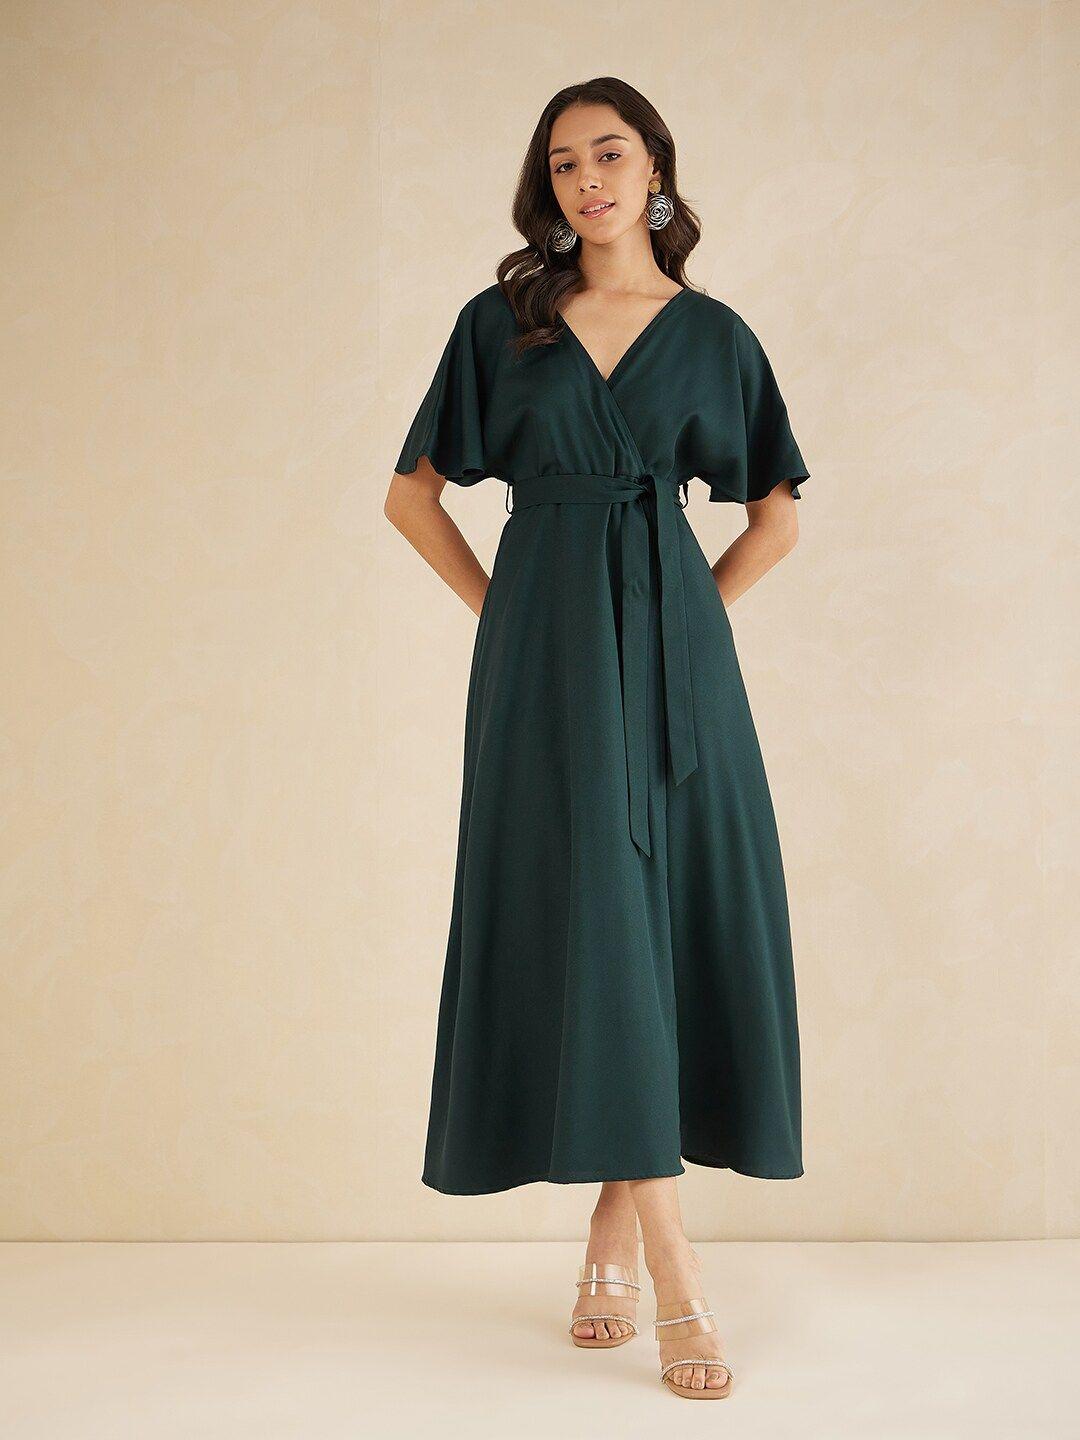 femella v-neck flared sleeves a-line dress comes with a belt